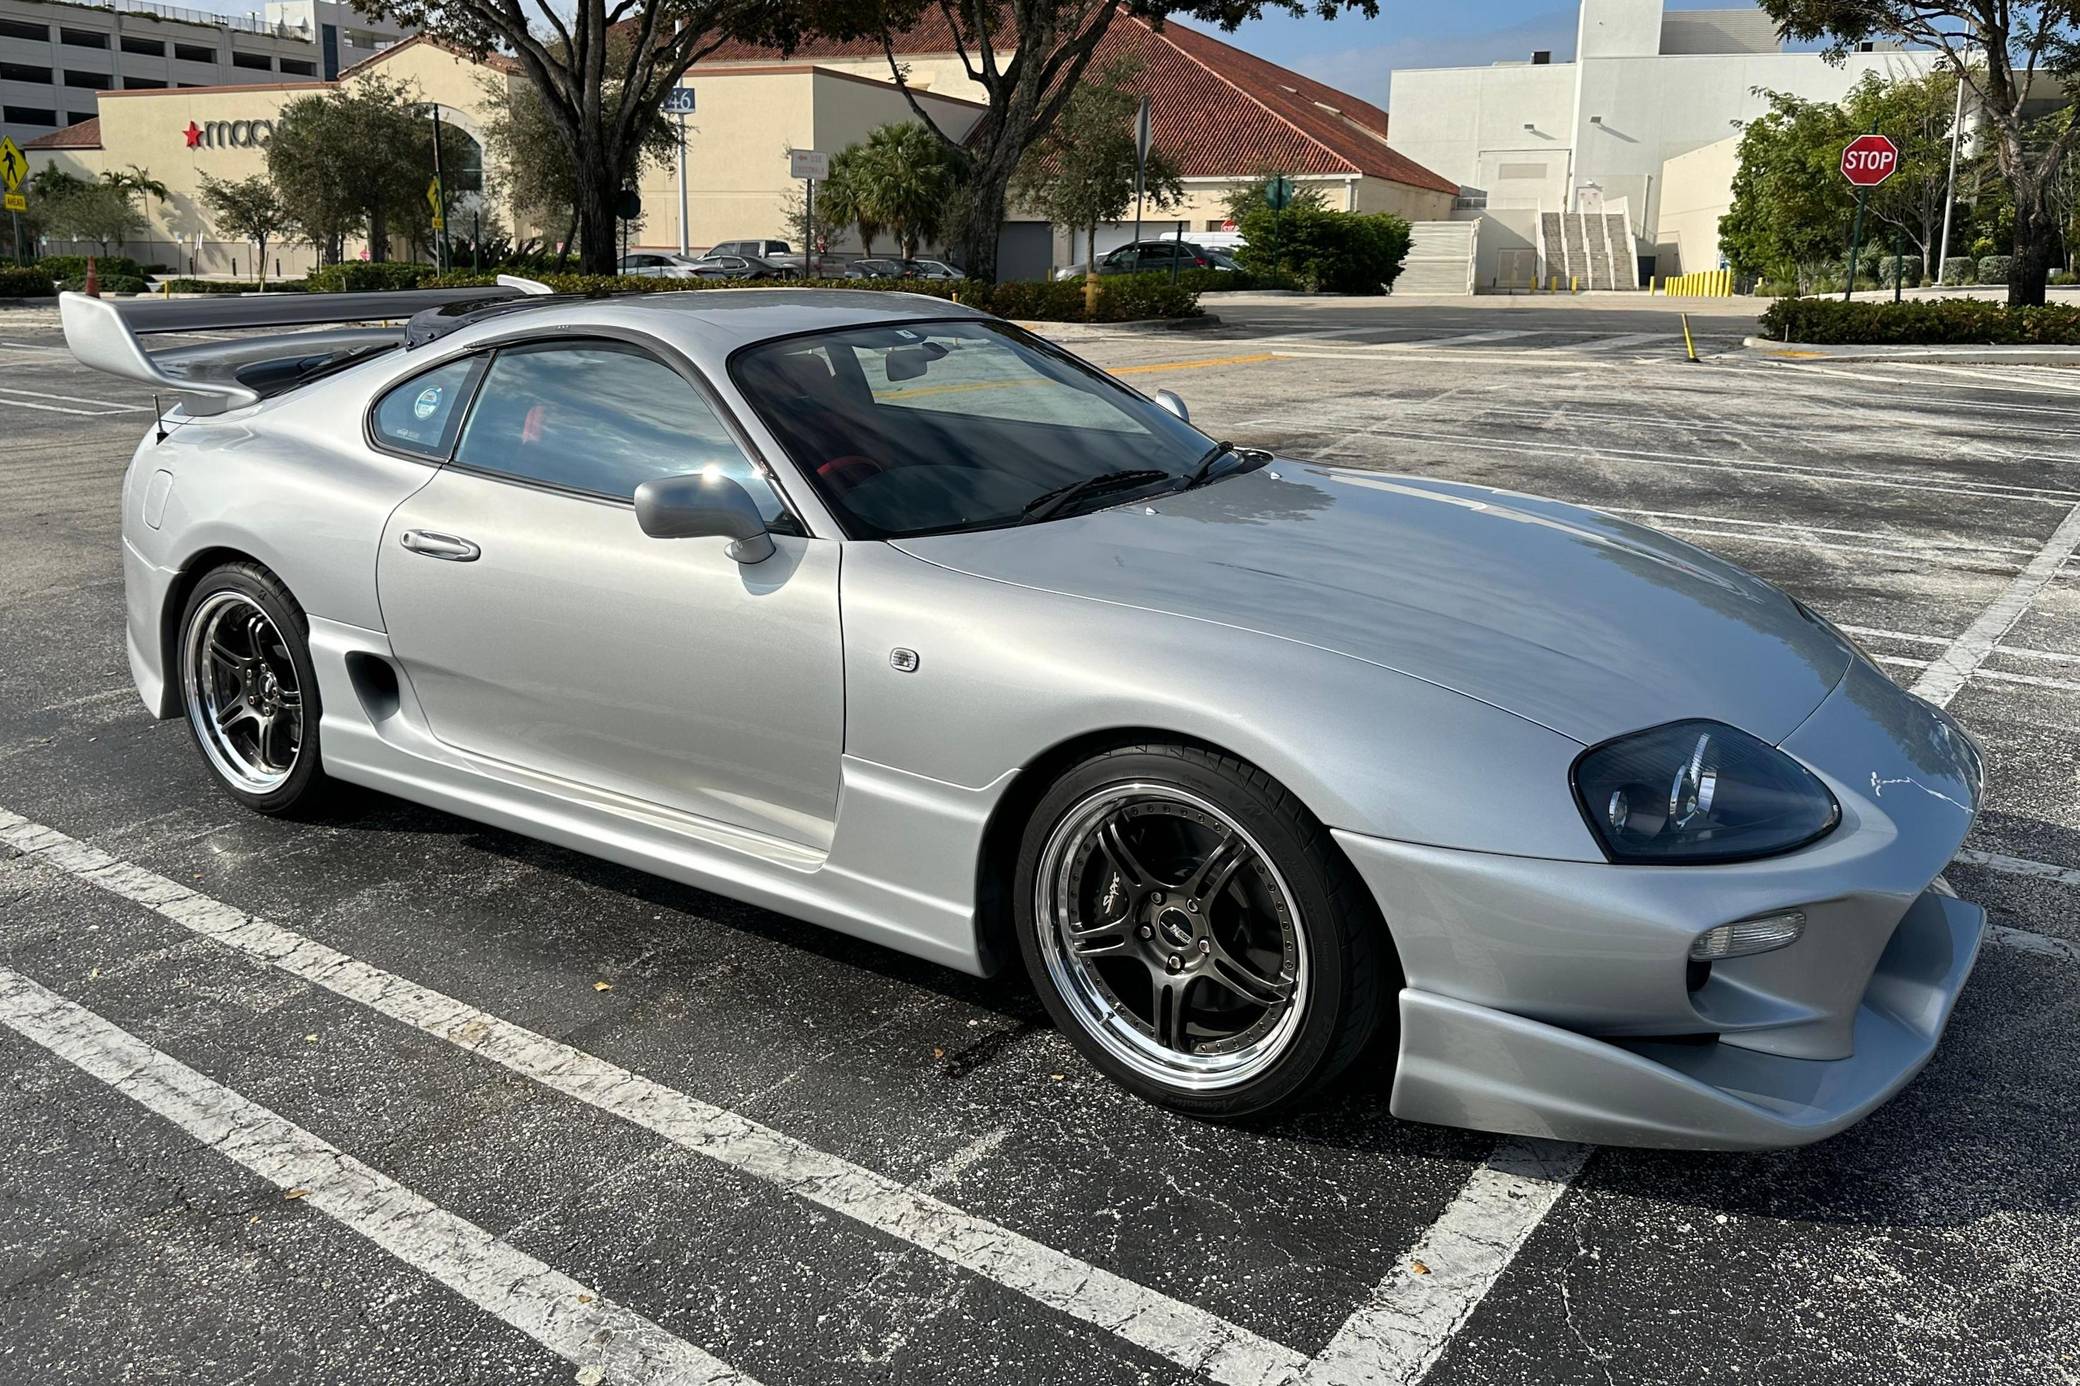 Toyota Supra MK4. My all time favourite car and ultimate dream car